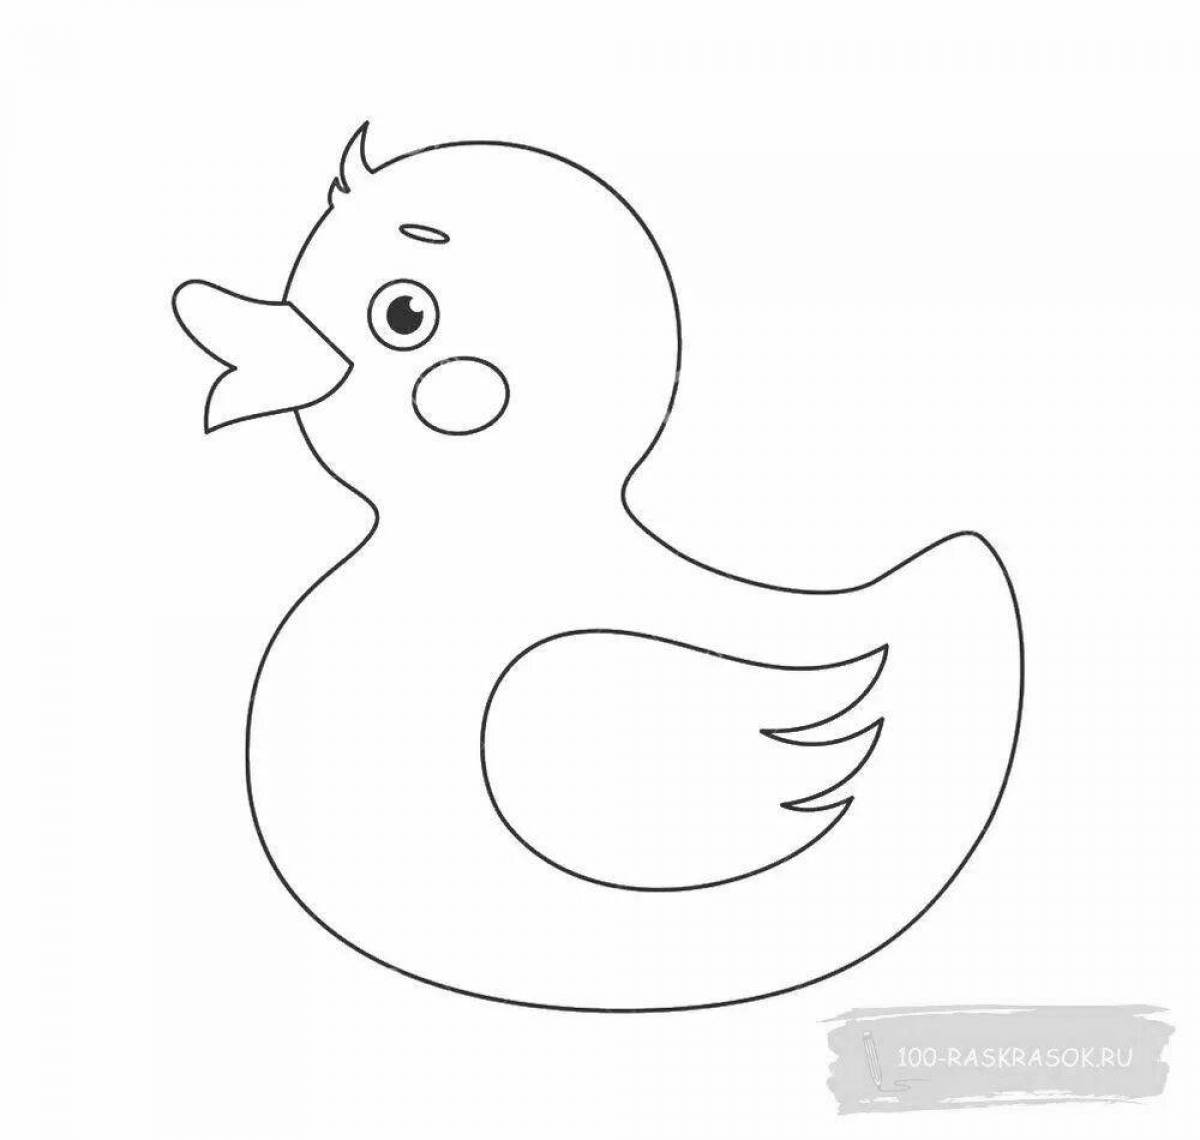 Sweet Dymkovo duck coloring pages for young children